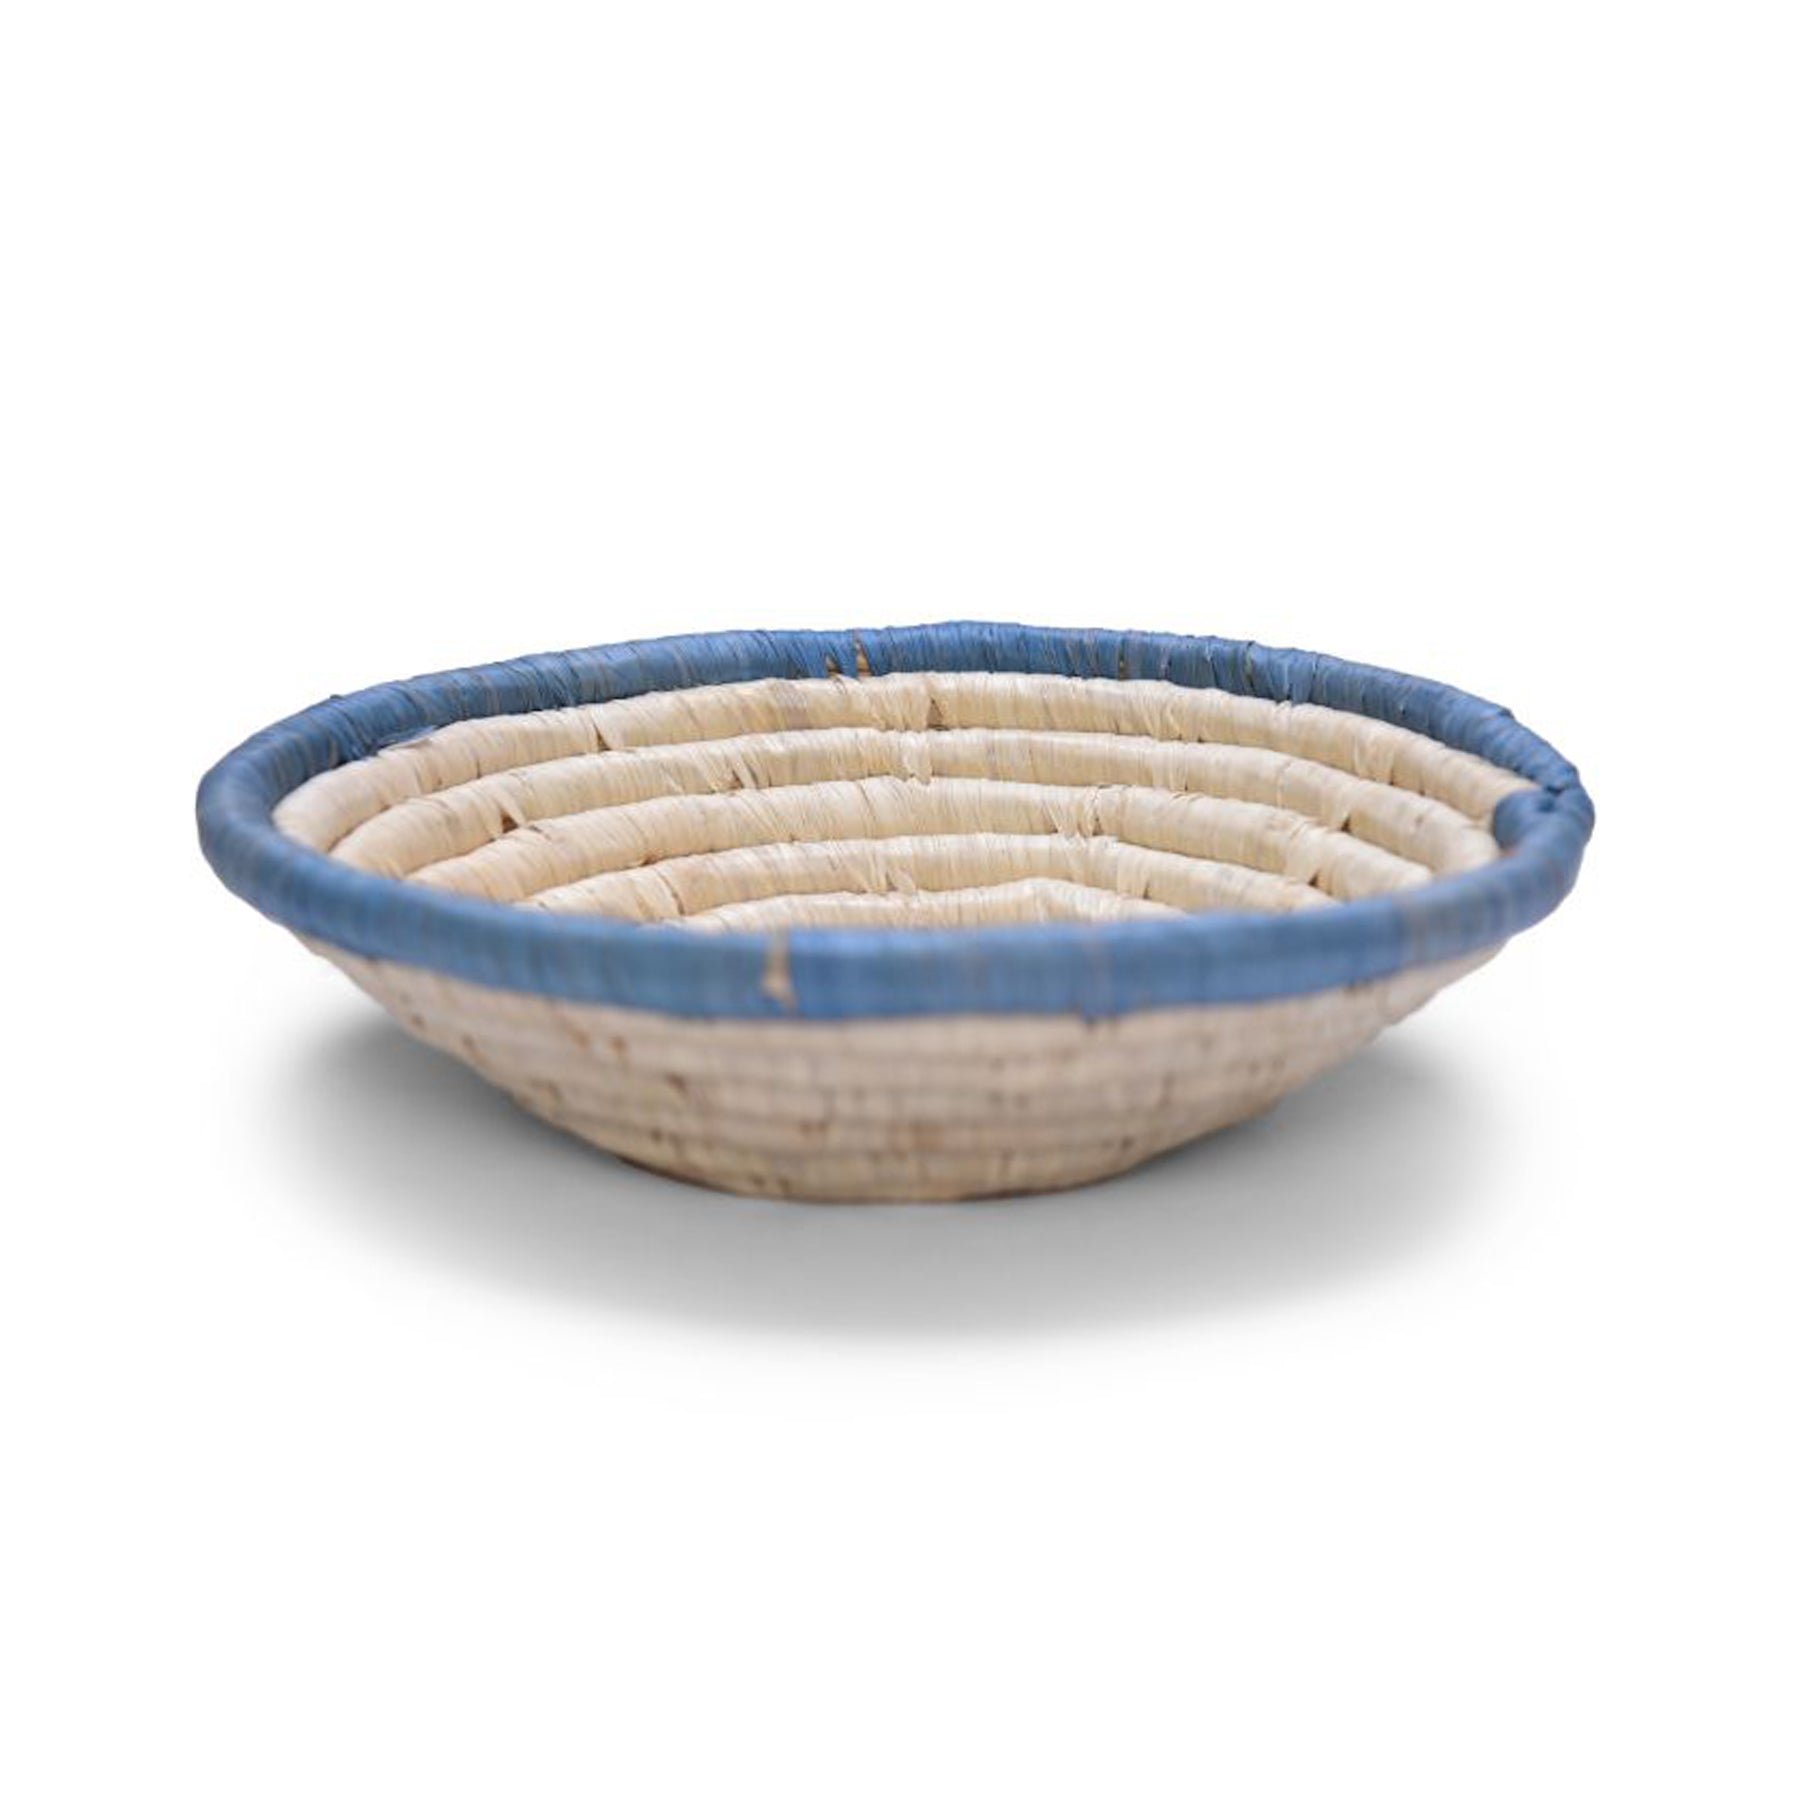 39694 - Blue Edged Woven Bowl - $26 - Purchased 